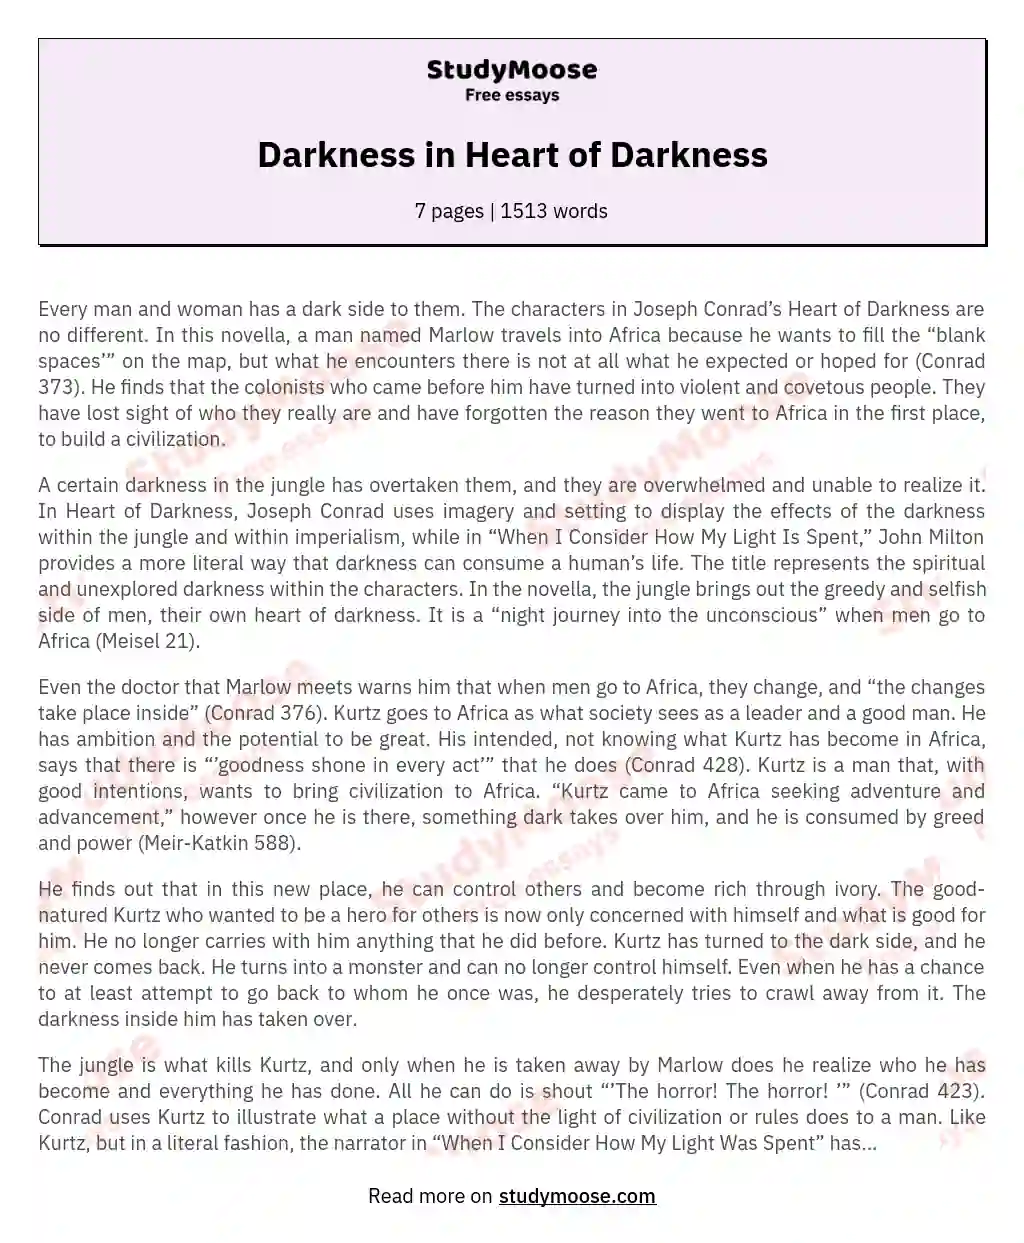 essay on fear of darkness